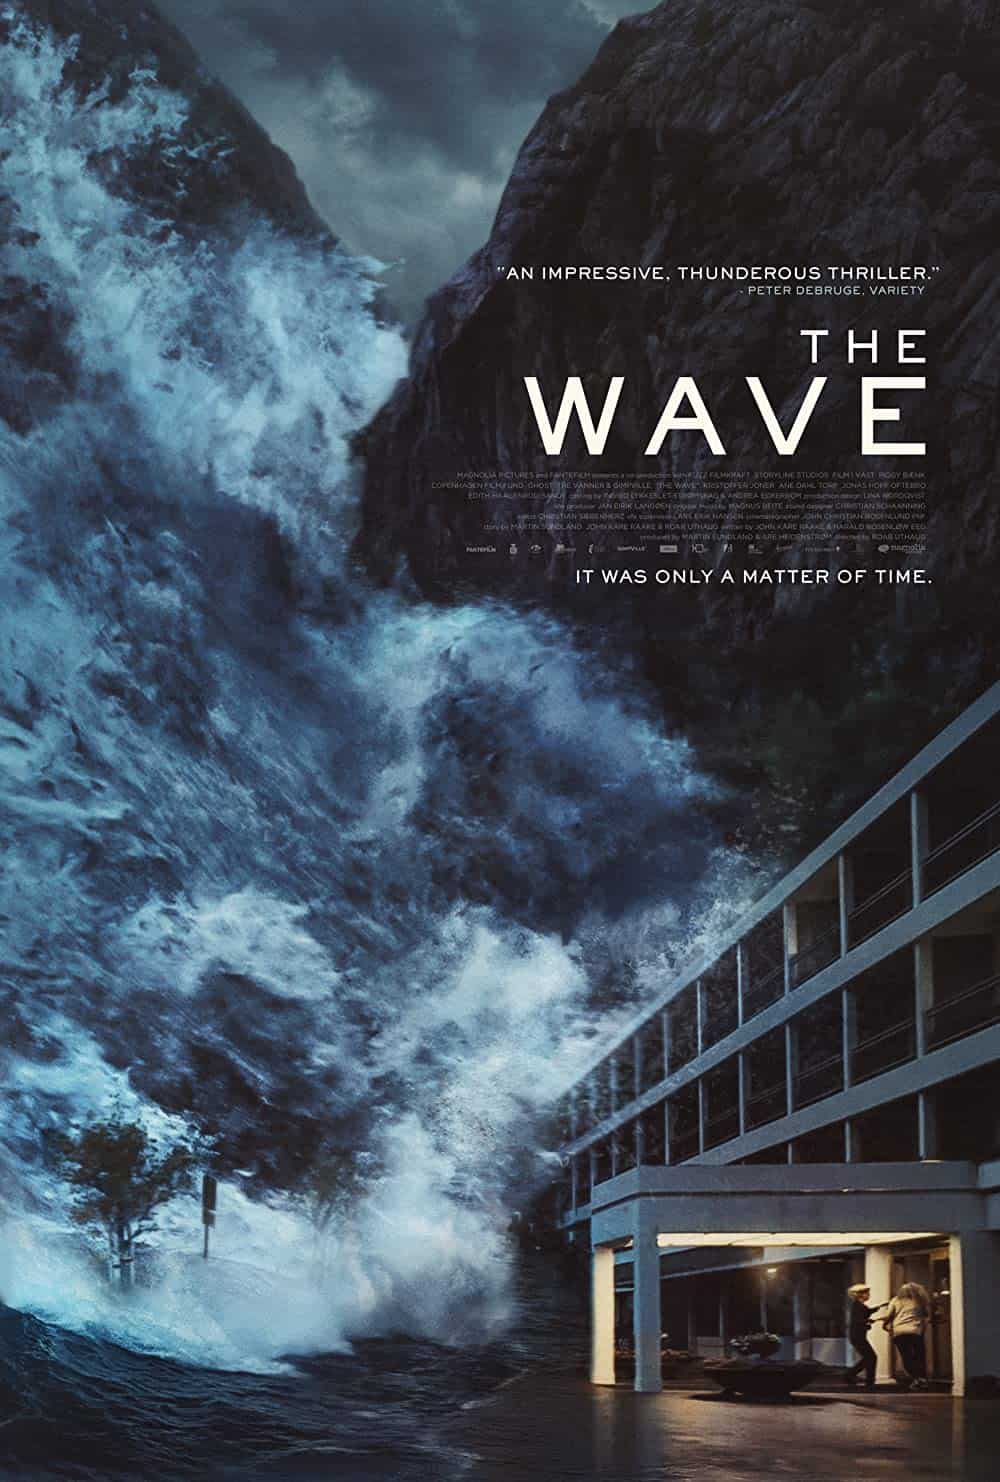 The Wave (2015) Best Tsunami Movies to Add in Your Watchlist